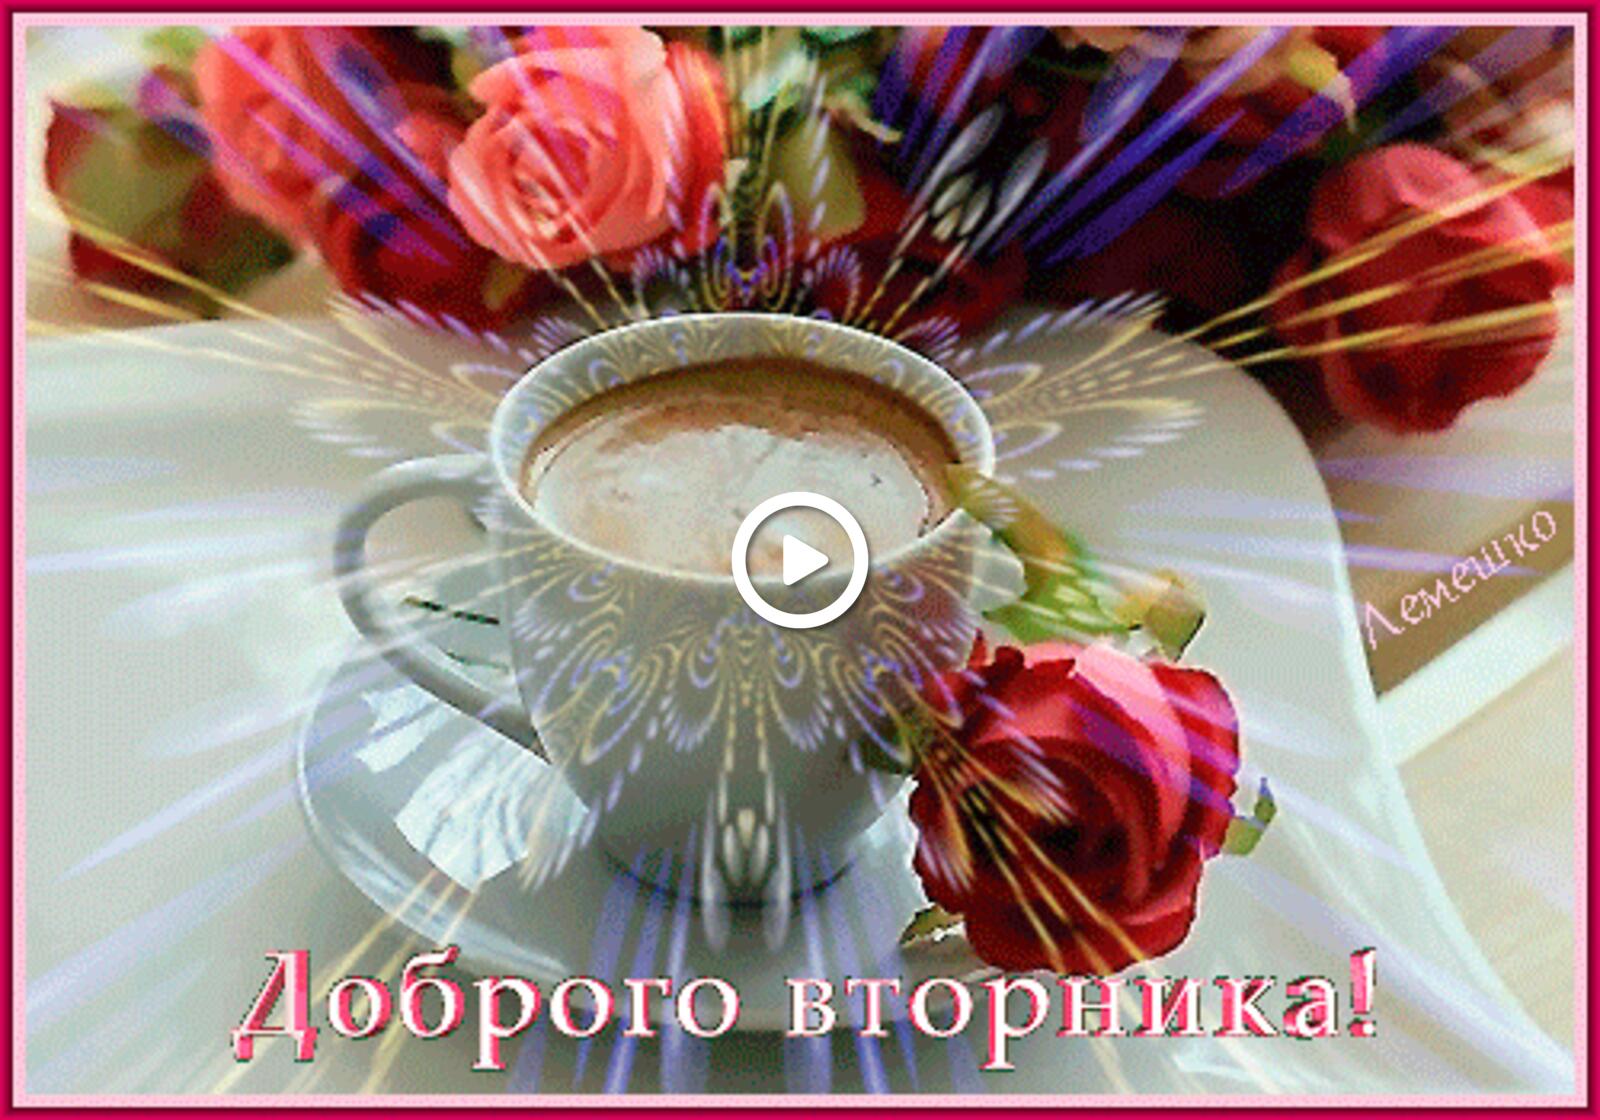 bouquet of roses saucer coffee cup